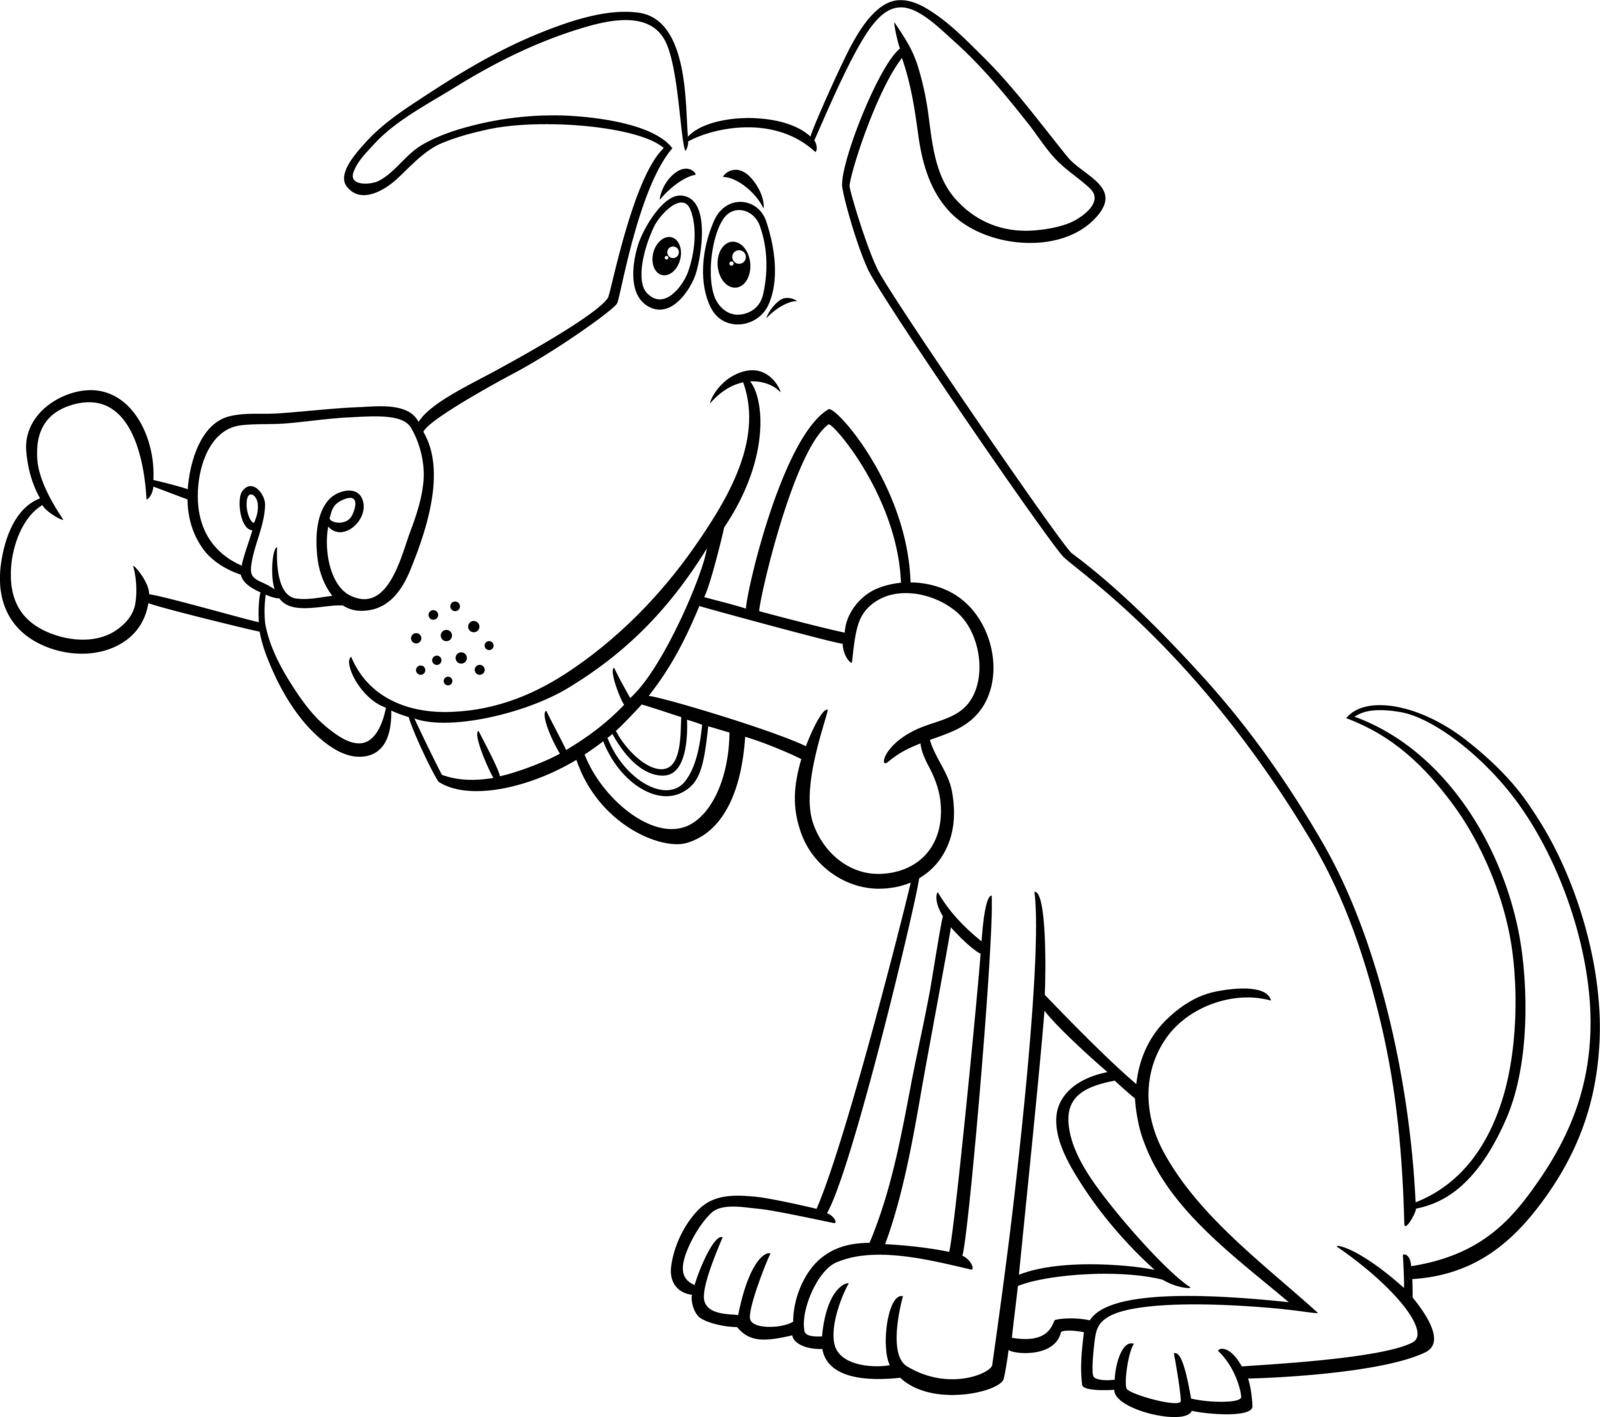 Black and white cartoon illustration of happy dog comic animal character with bone coloring page